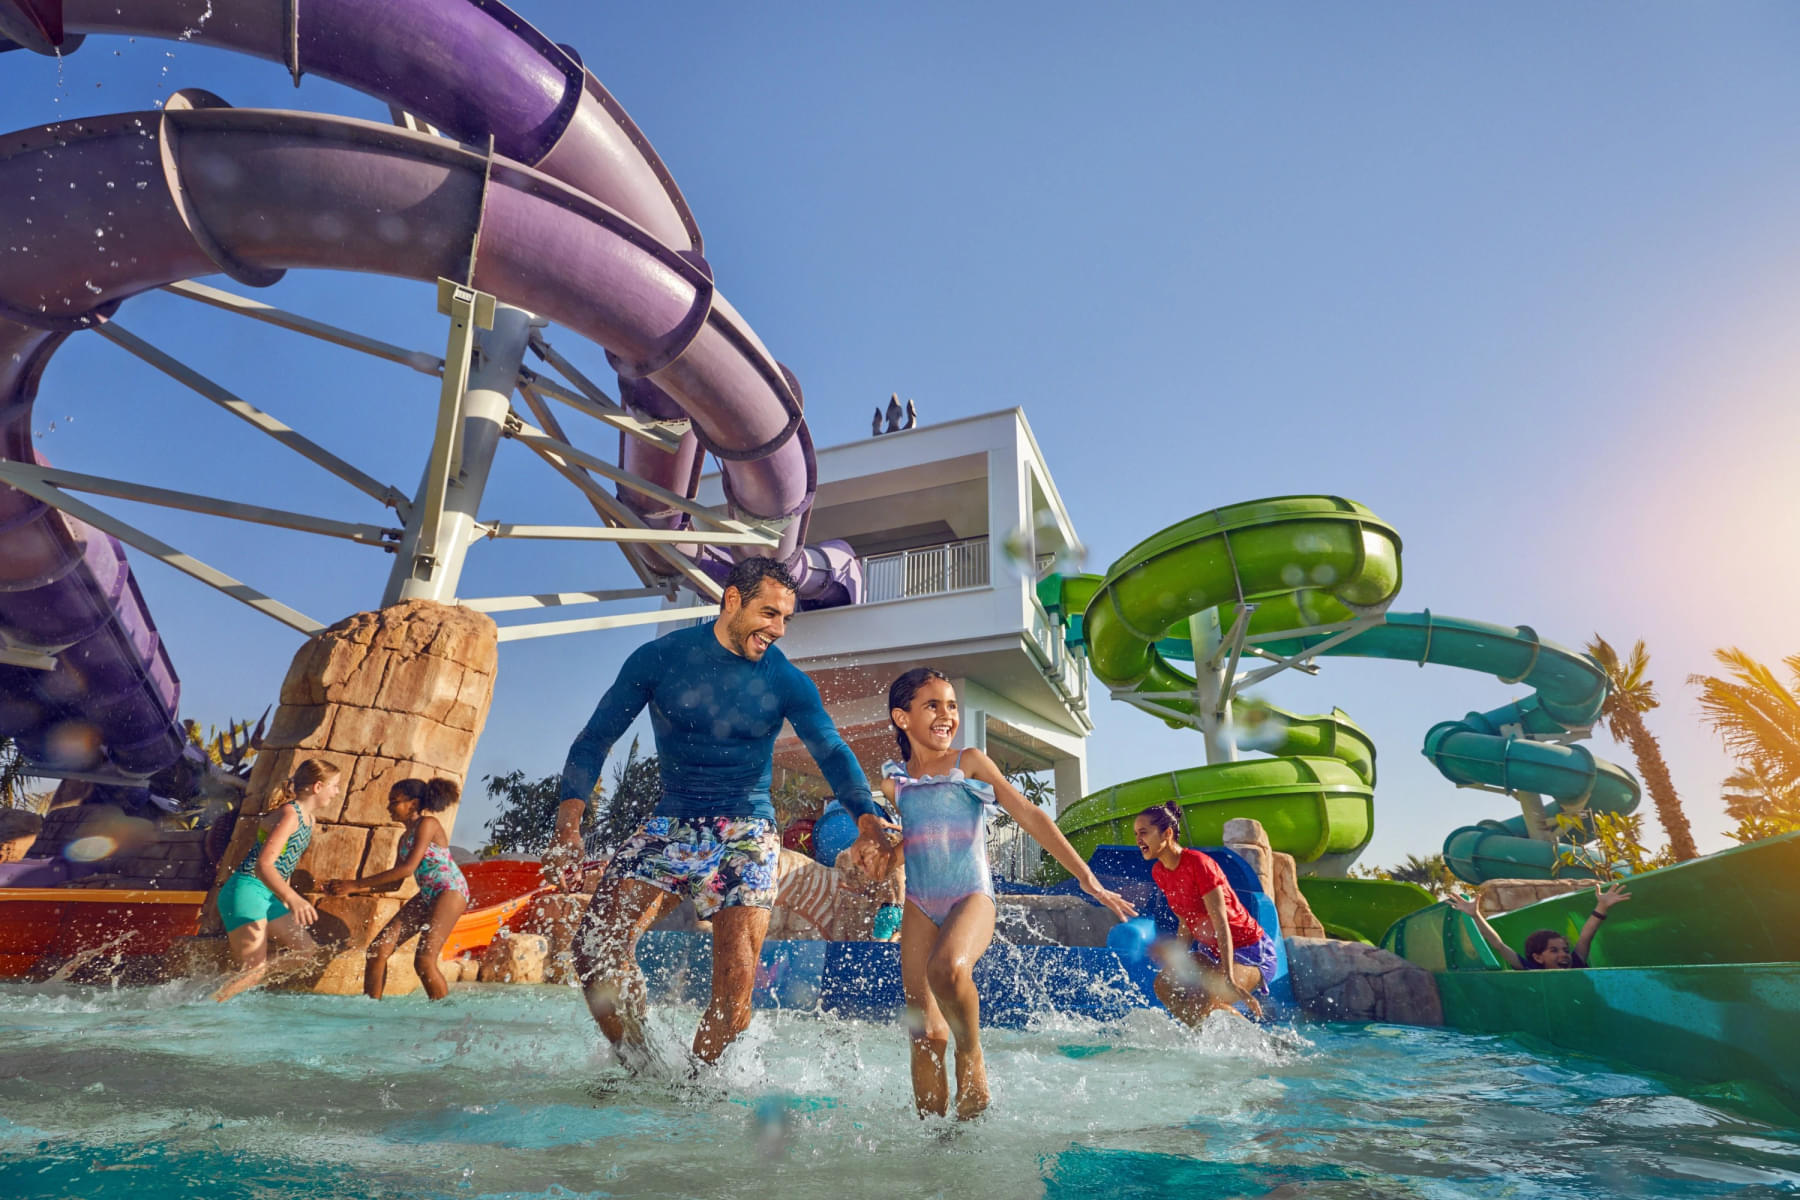 Spend an amazing time with your kid at the Splashers Kid's Play Area